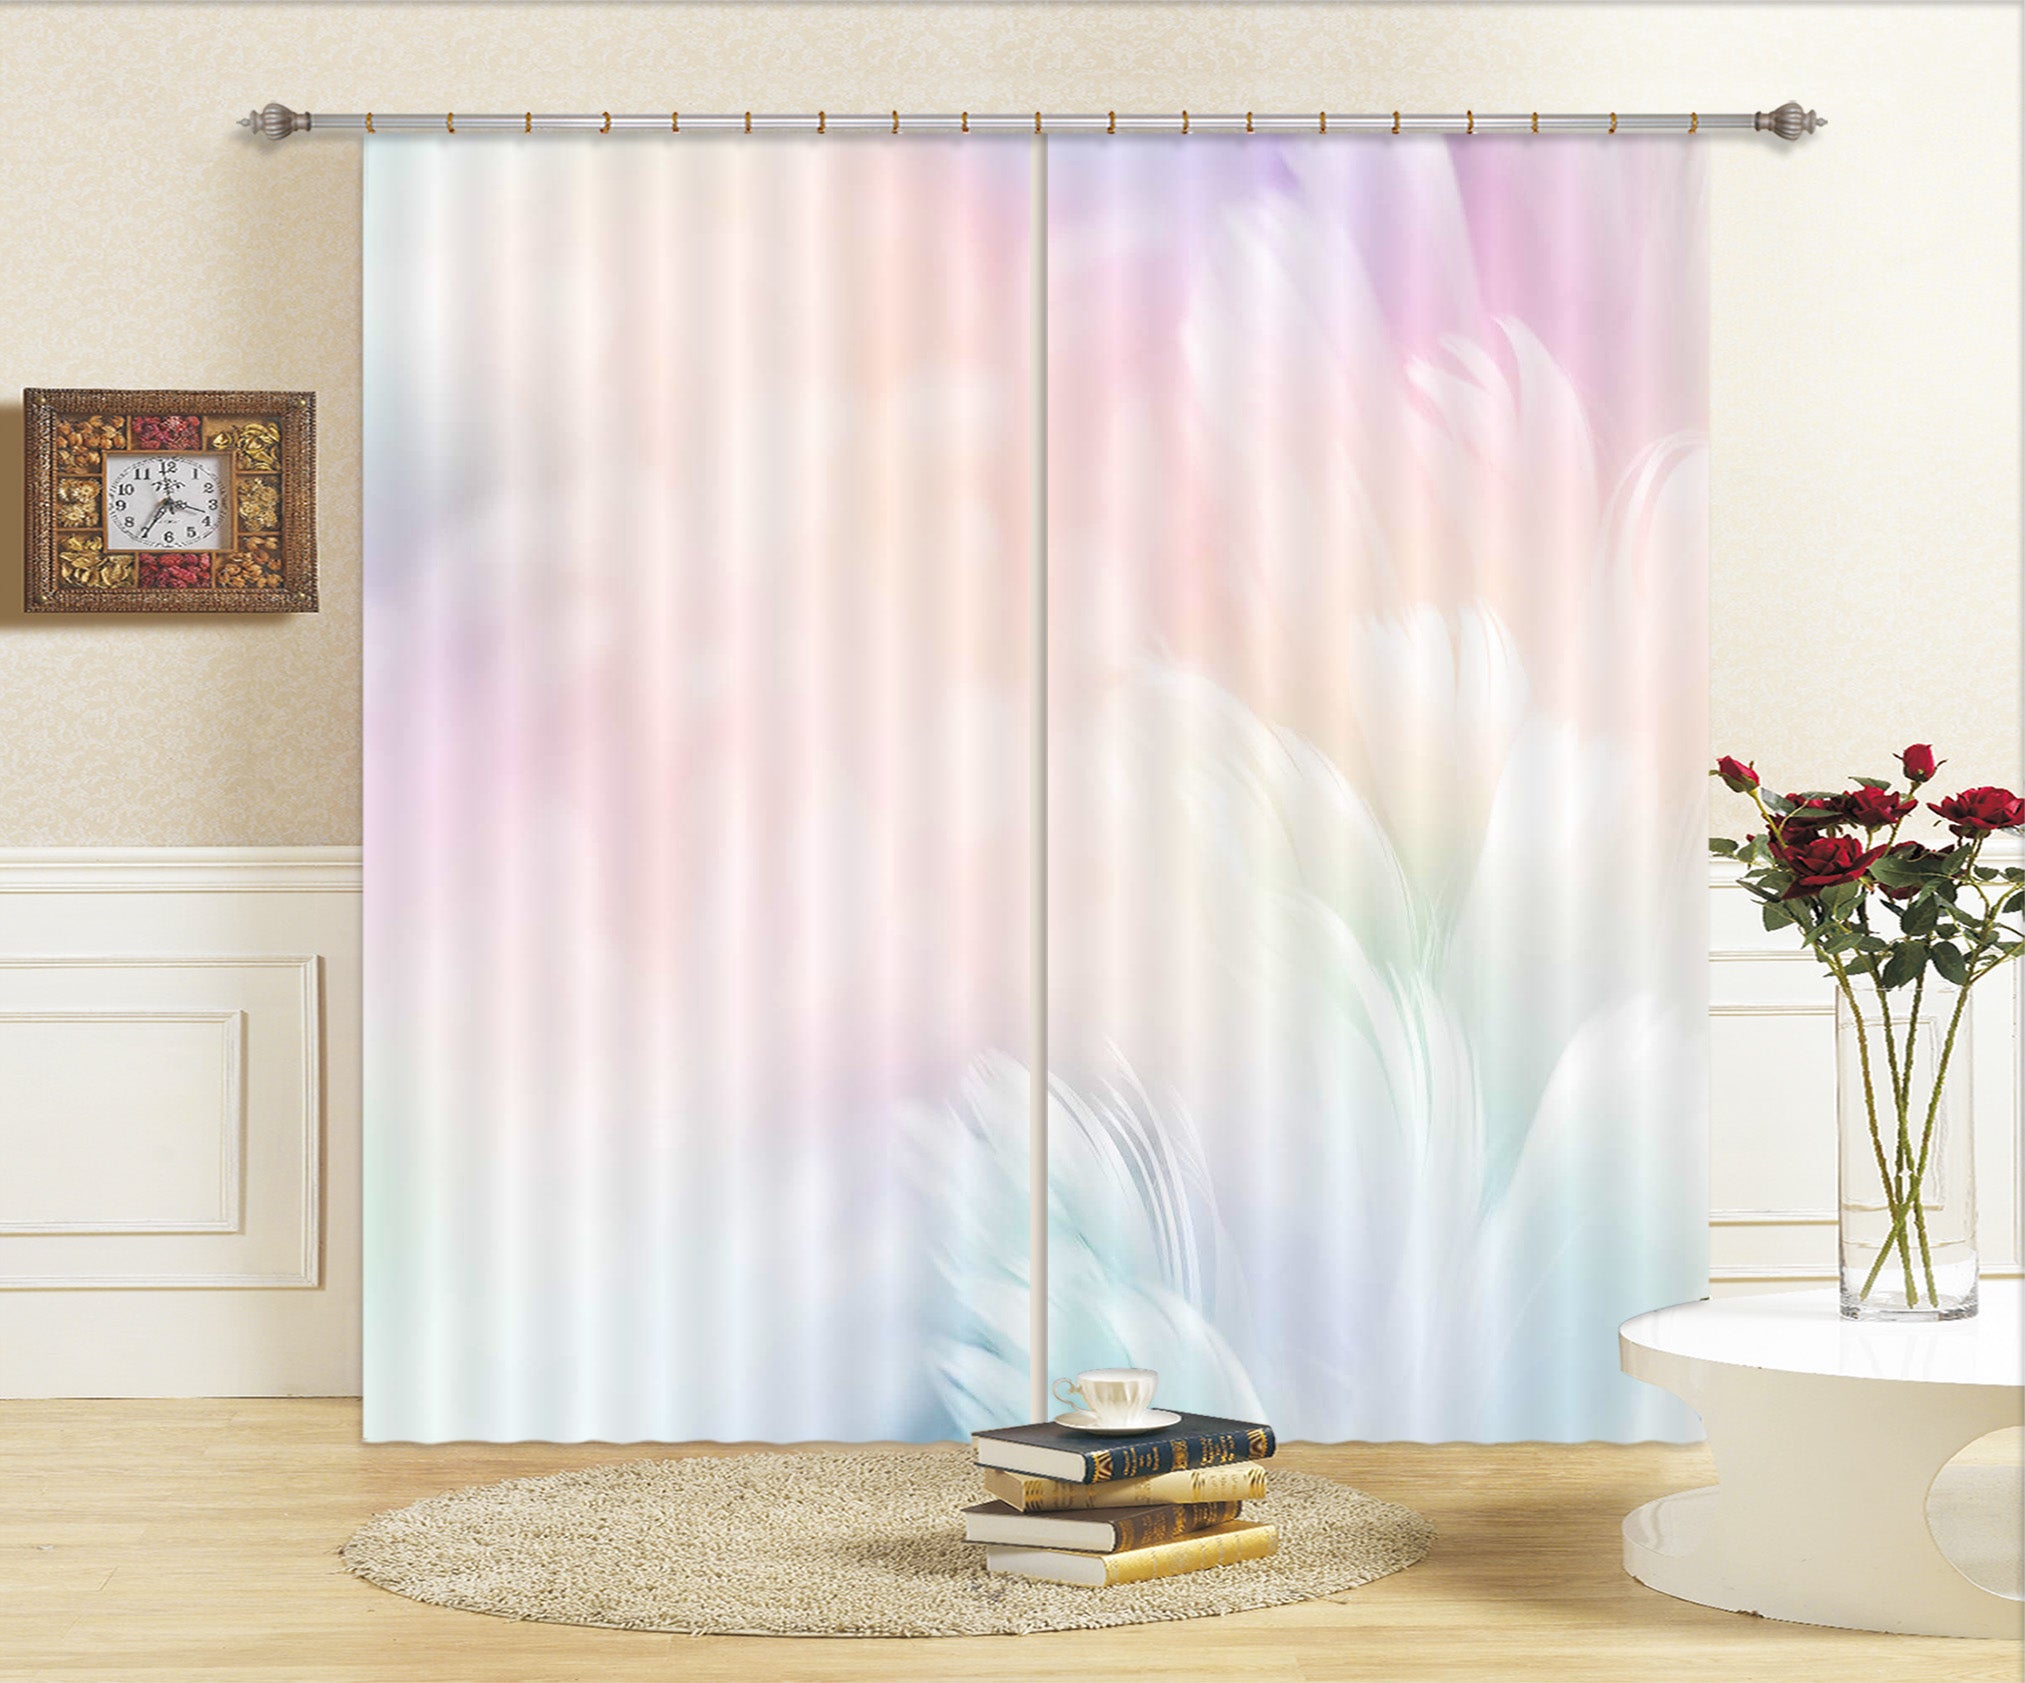 3D Colored Feathers 124 Curtains Drapes